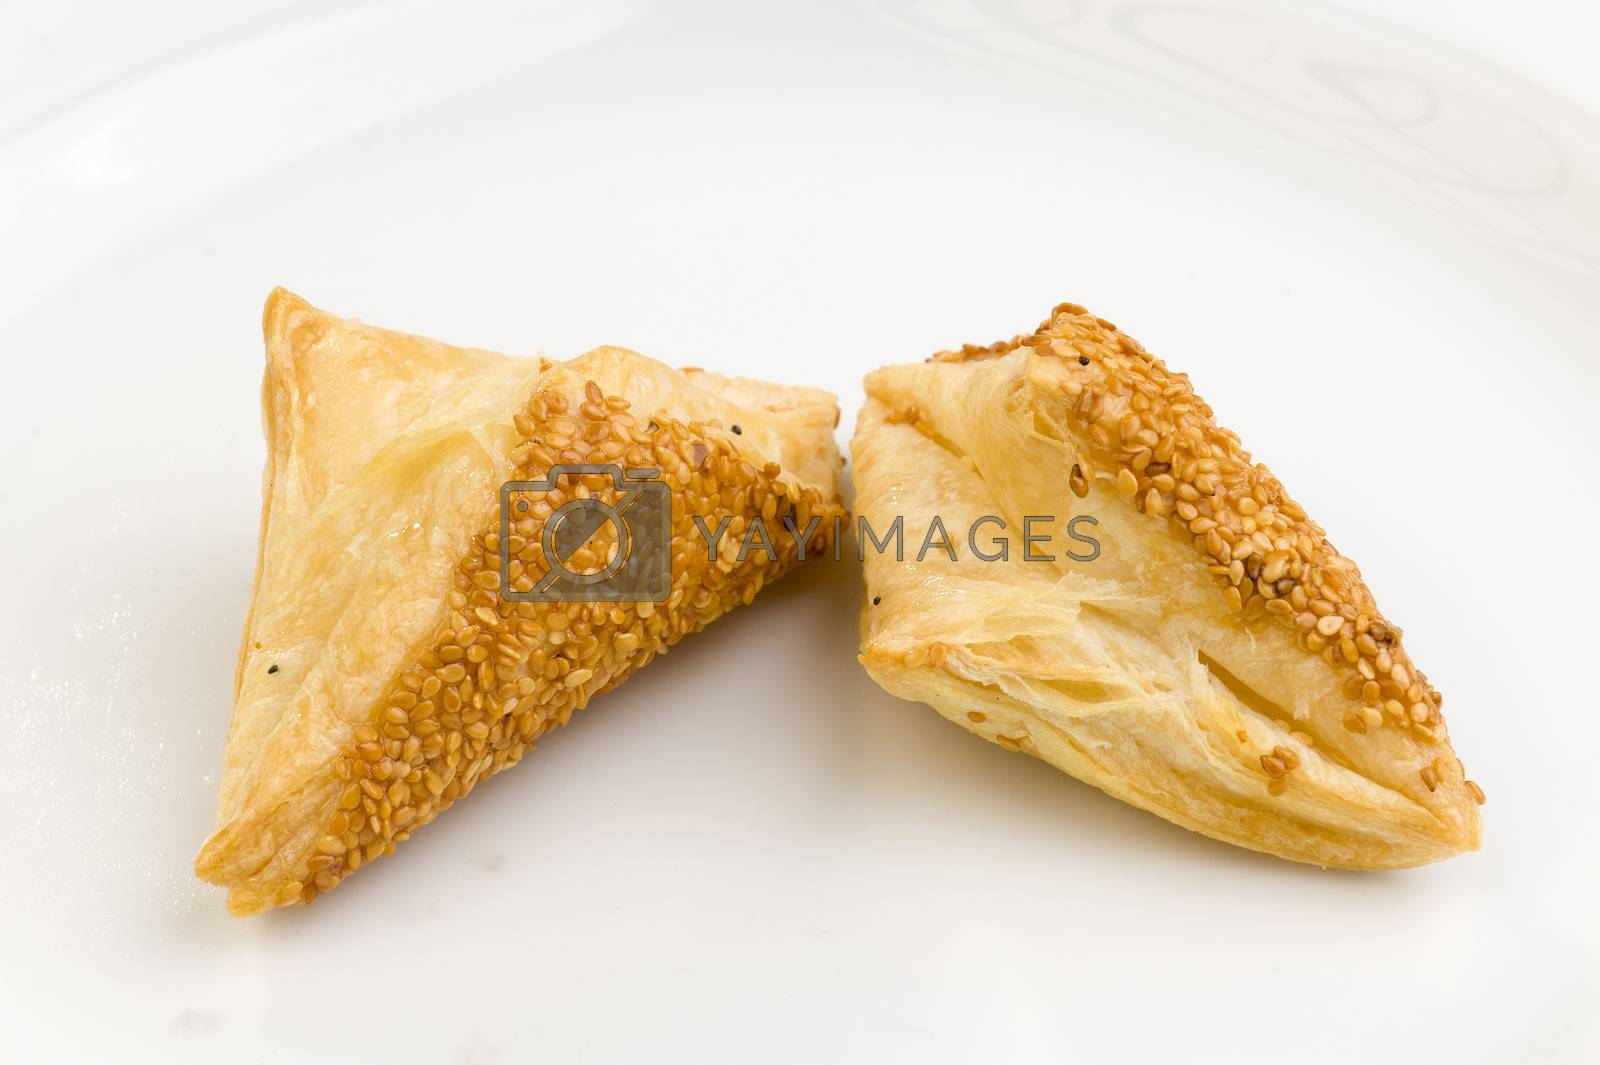 Royalty free image of Turkish Pastries by emirkoo